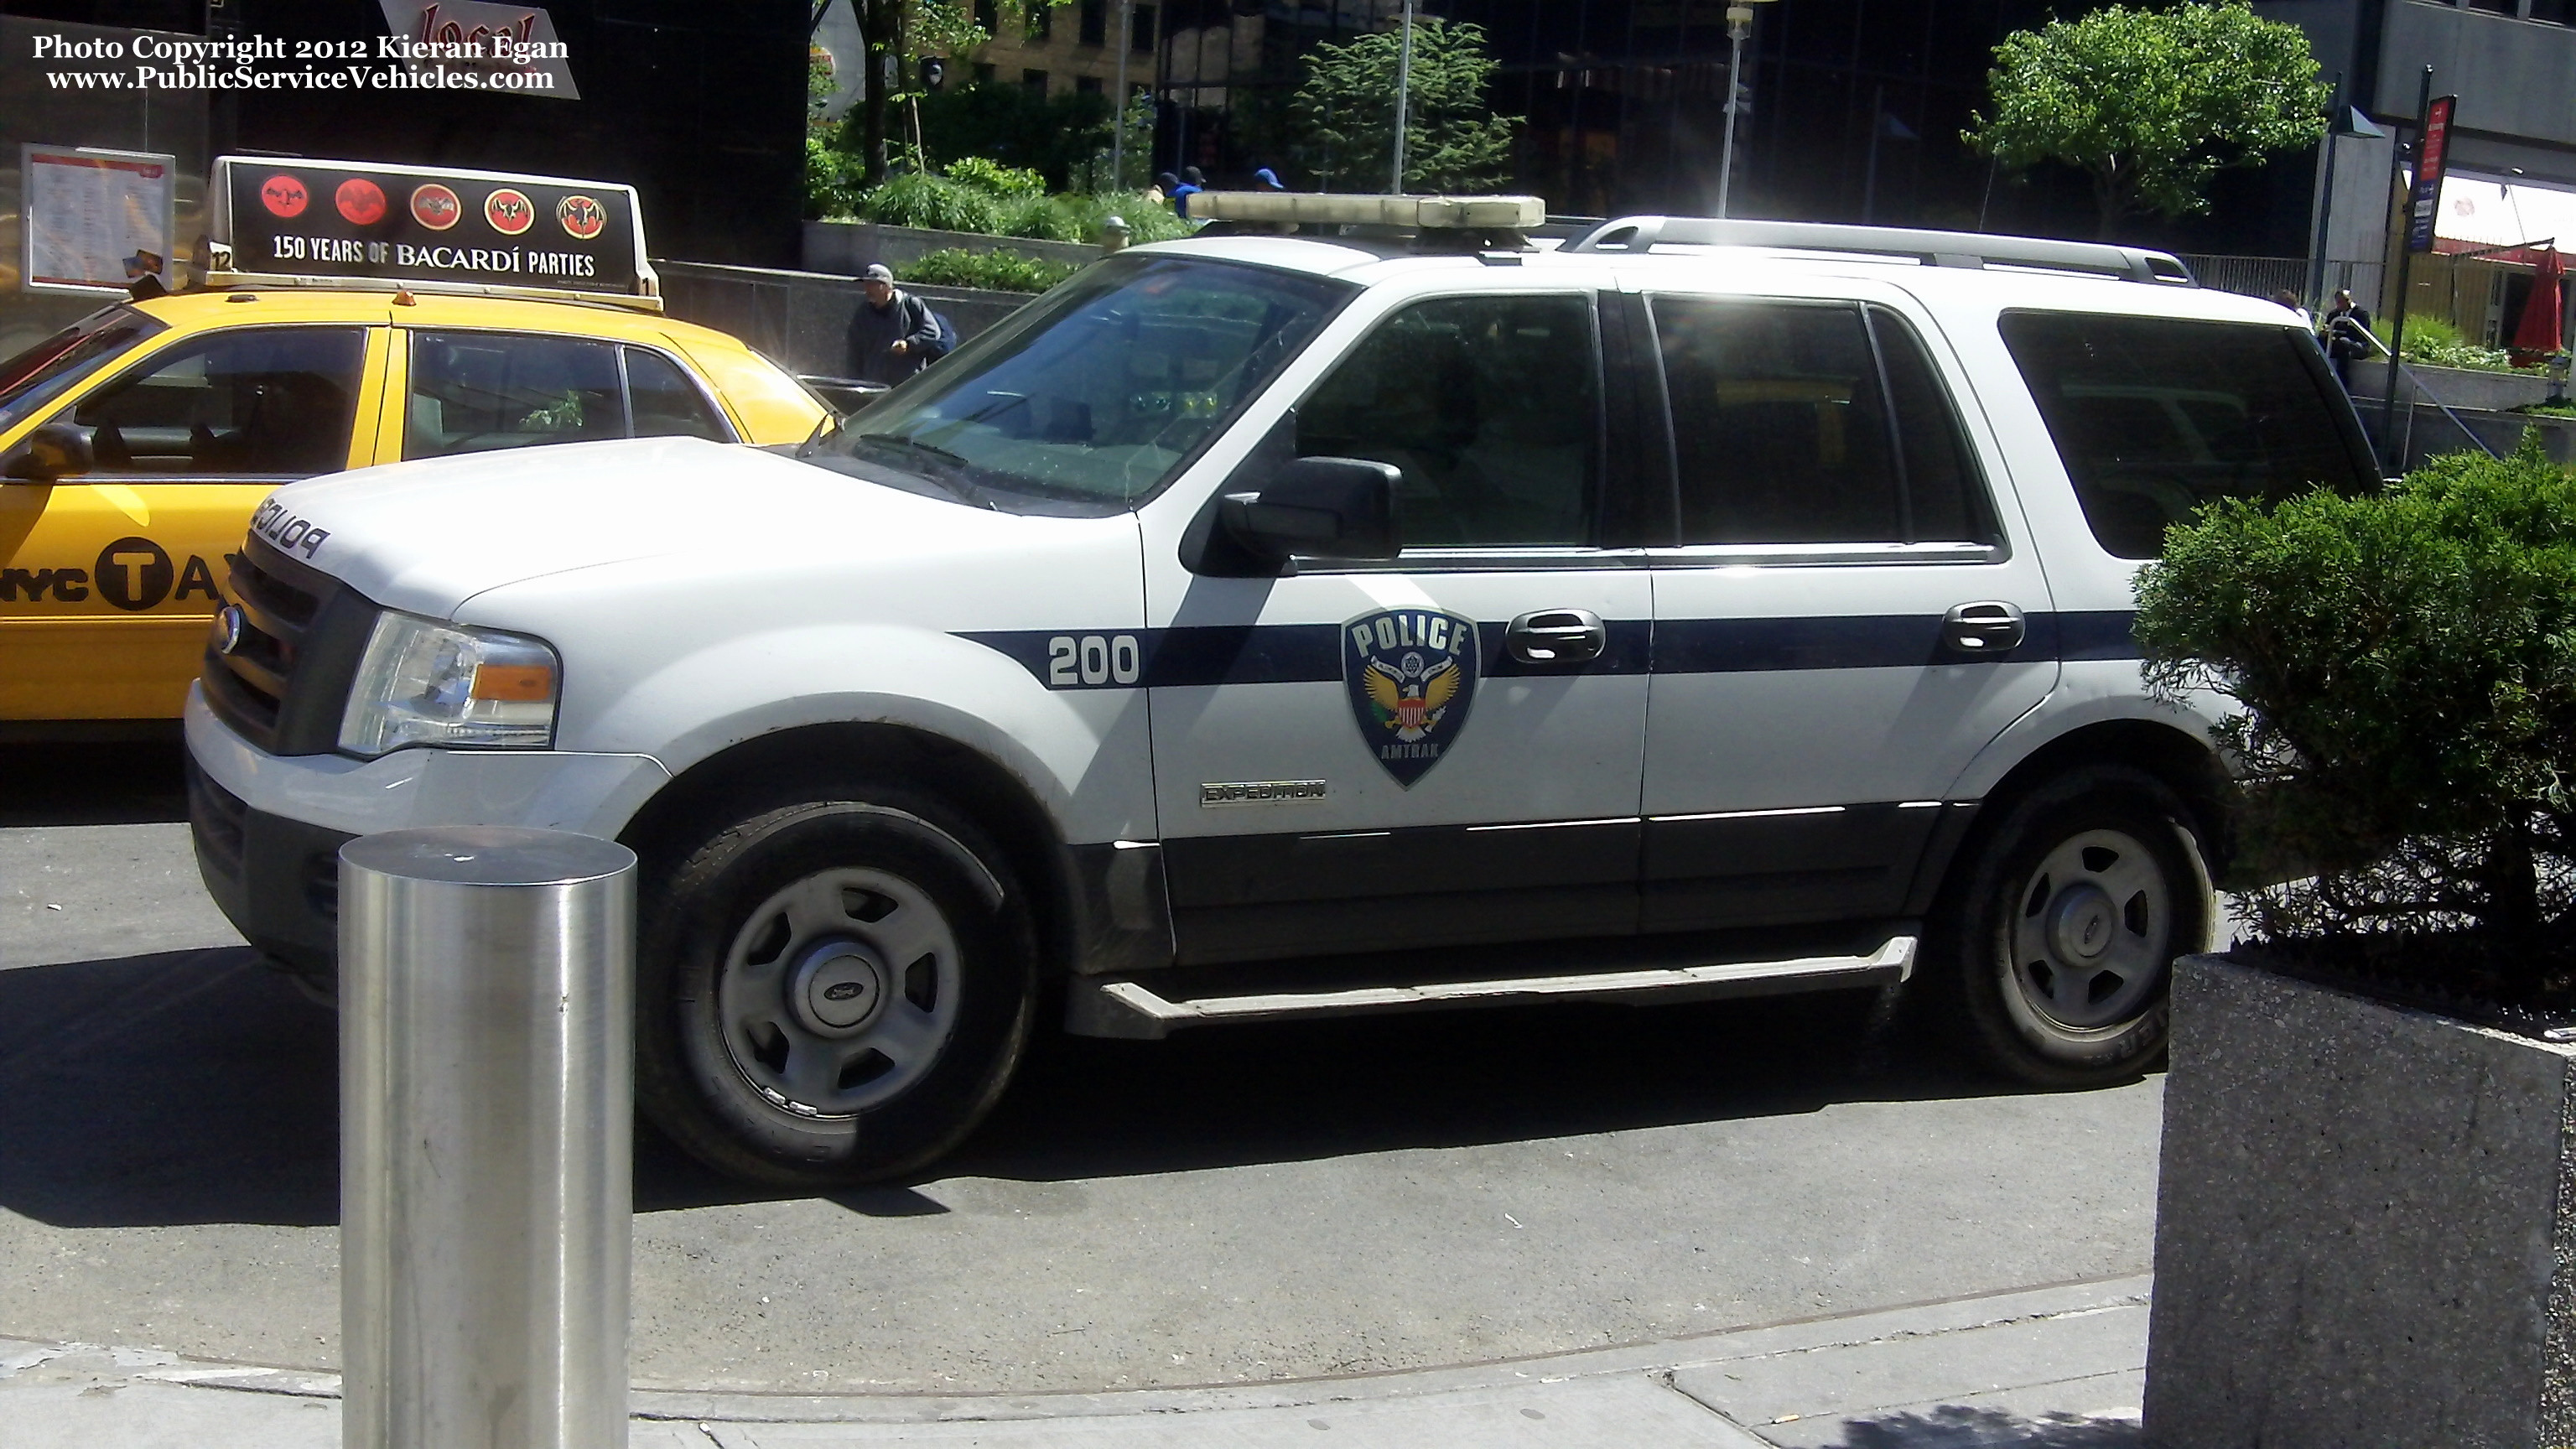 A photo  of Amtrak Police
            Cruiser 200, a 2007-2012 Ford Expedition             taken by Kieran Egan